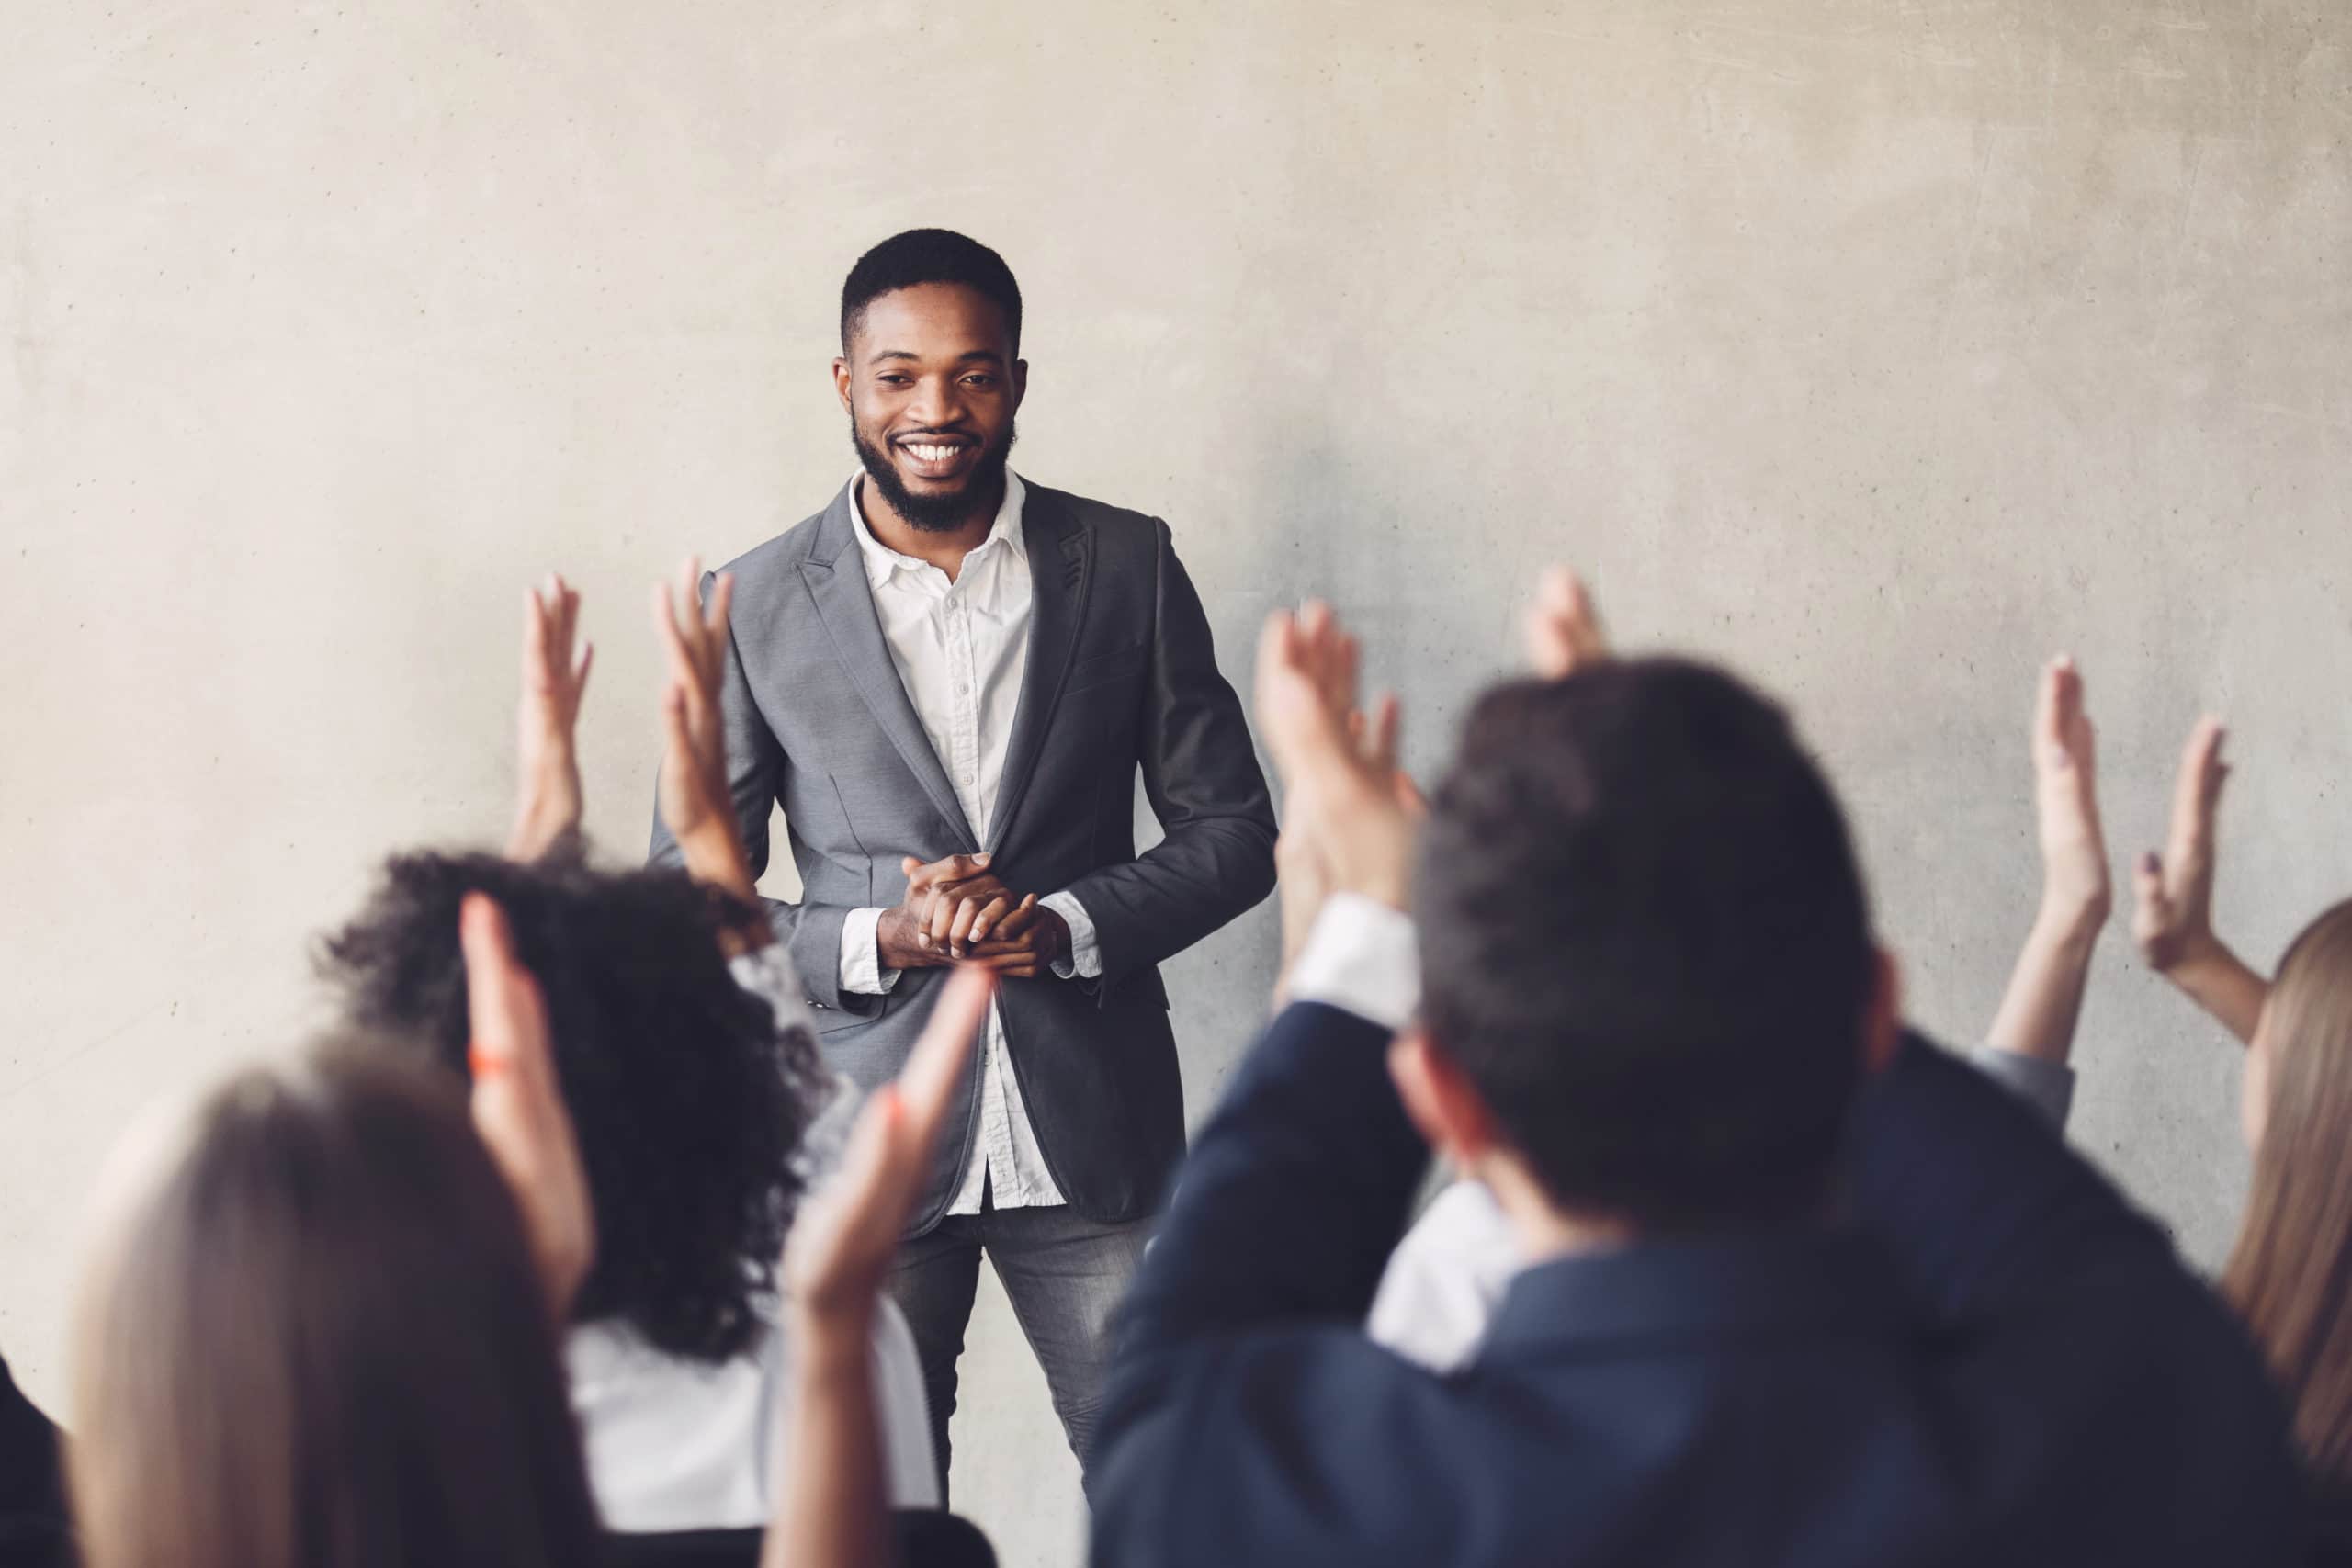 Audience clapping hands to speaker after business seminar